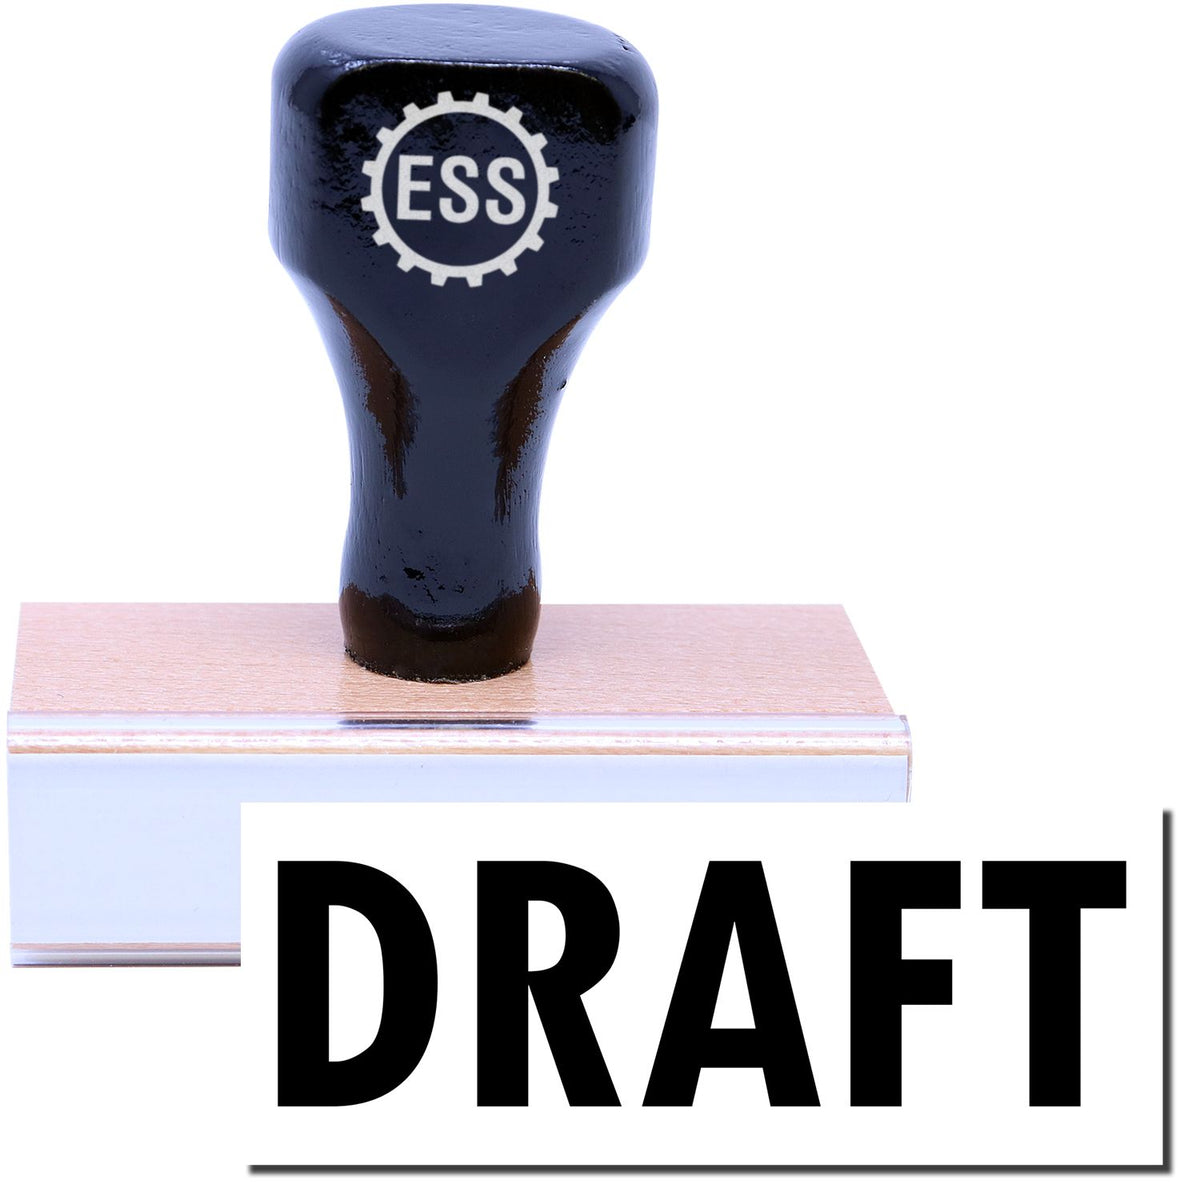 A stock office rubber stamp with a stamped image showing how the text &quot;DRAFT&quot; is displayed after stamping.